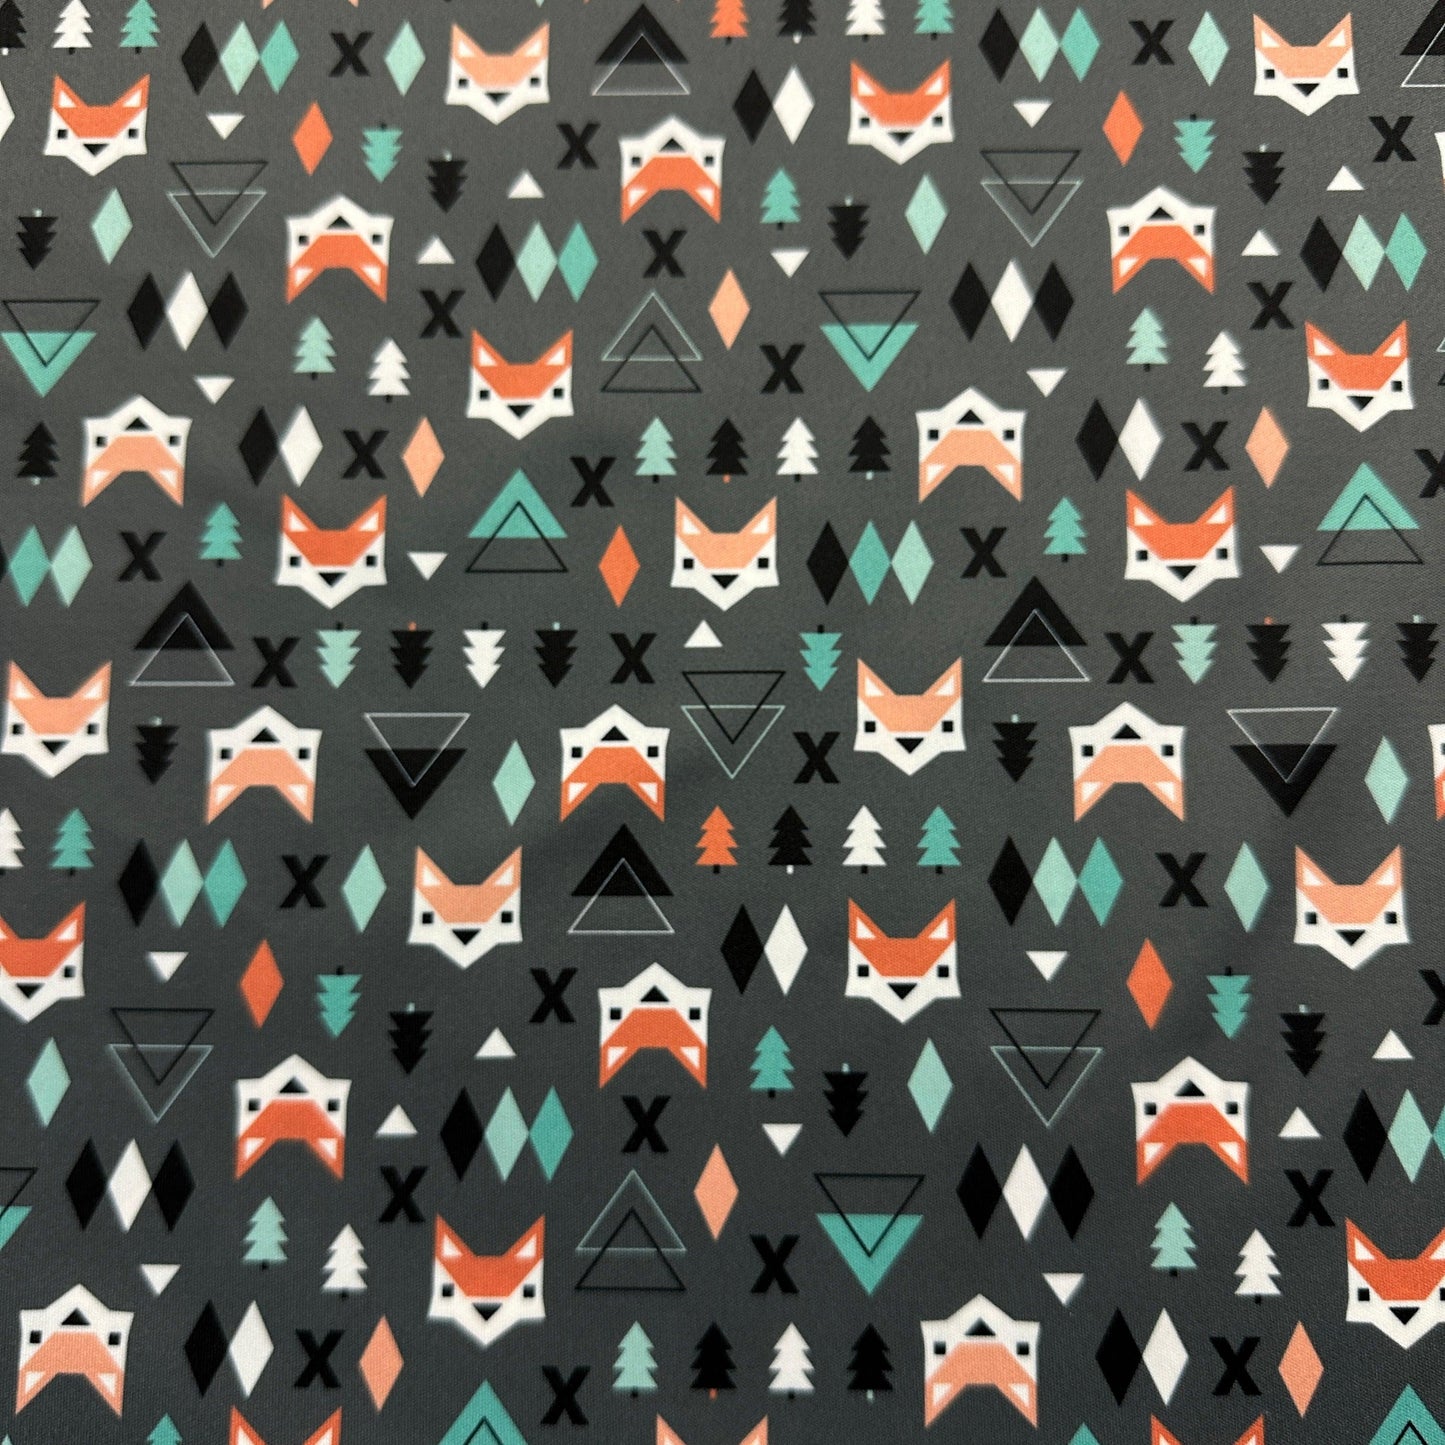 Foxes and Triangles 1 mil PUL Fabric - Made in the USA - Nature's Fabrics